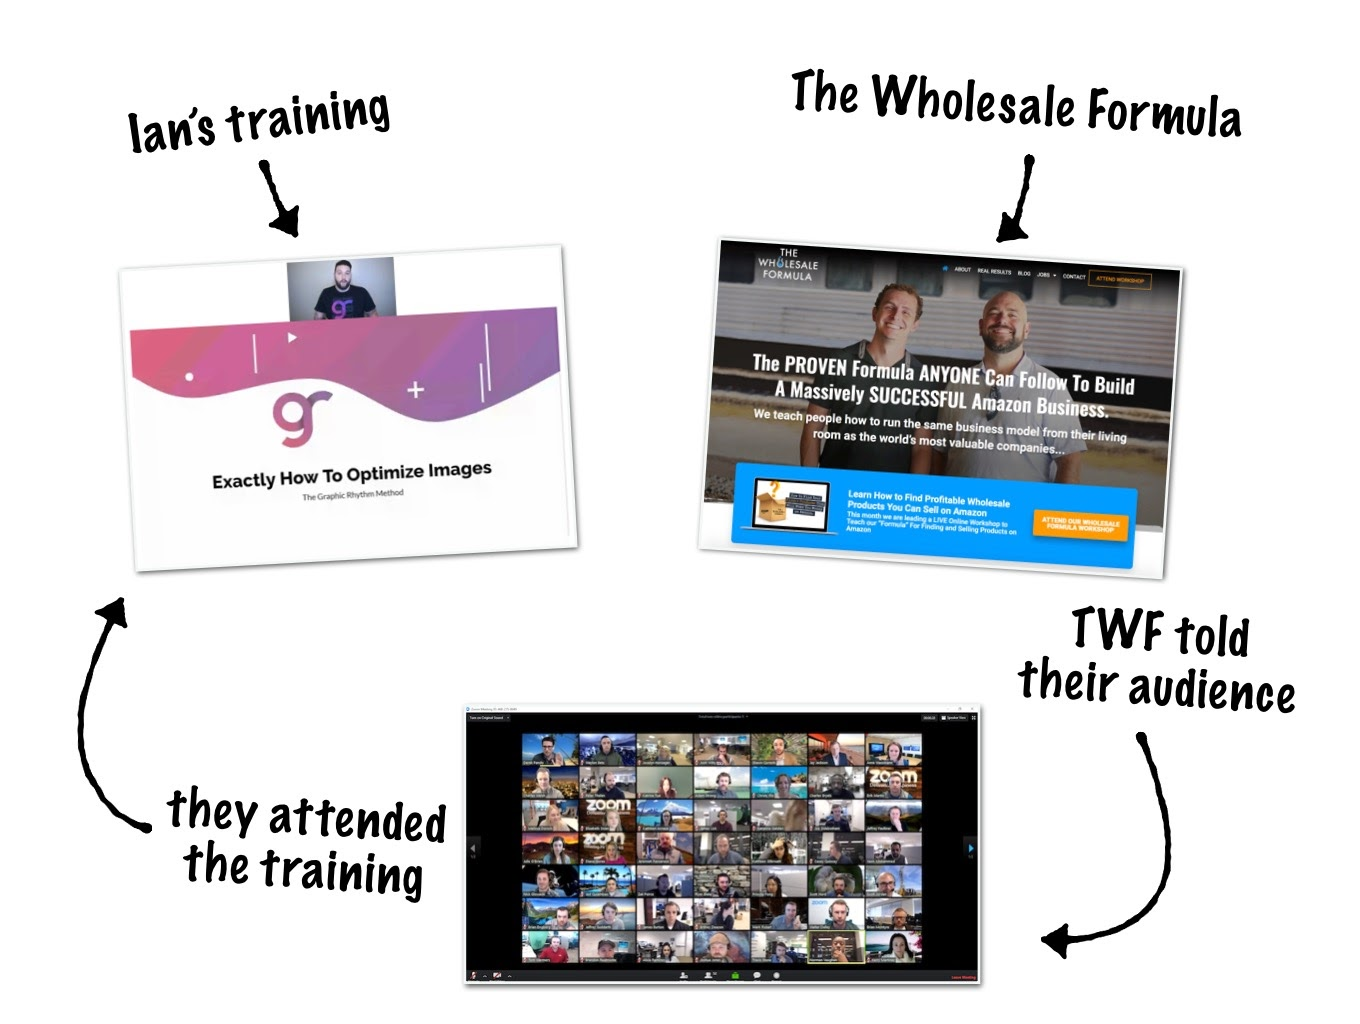 Ian Bowen's training > The Wholesale Formula > TWF told their audience > They attended Ian's training